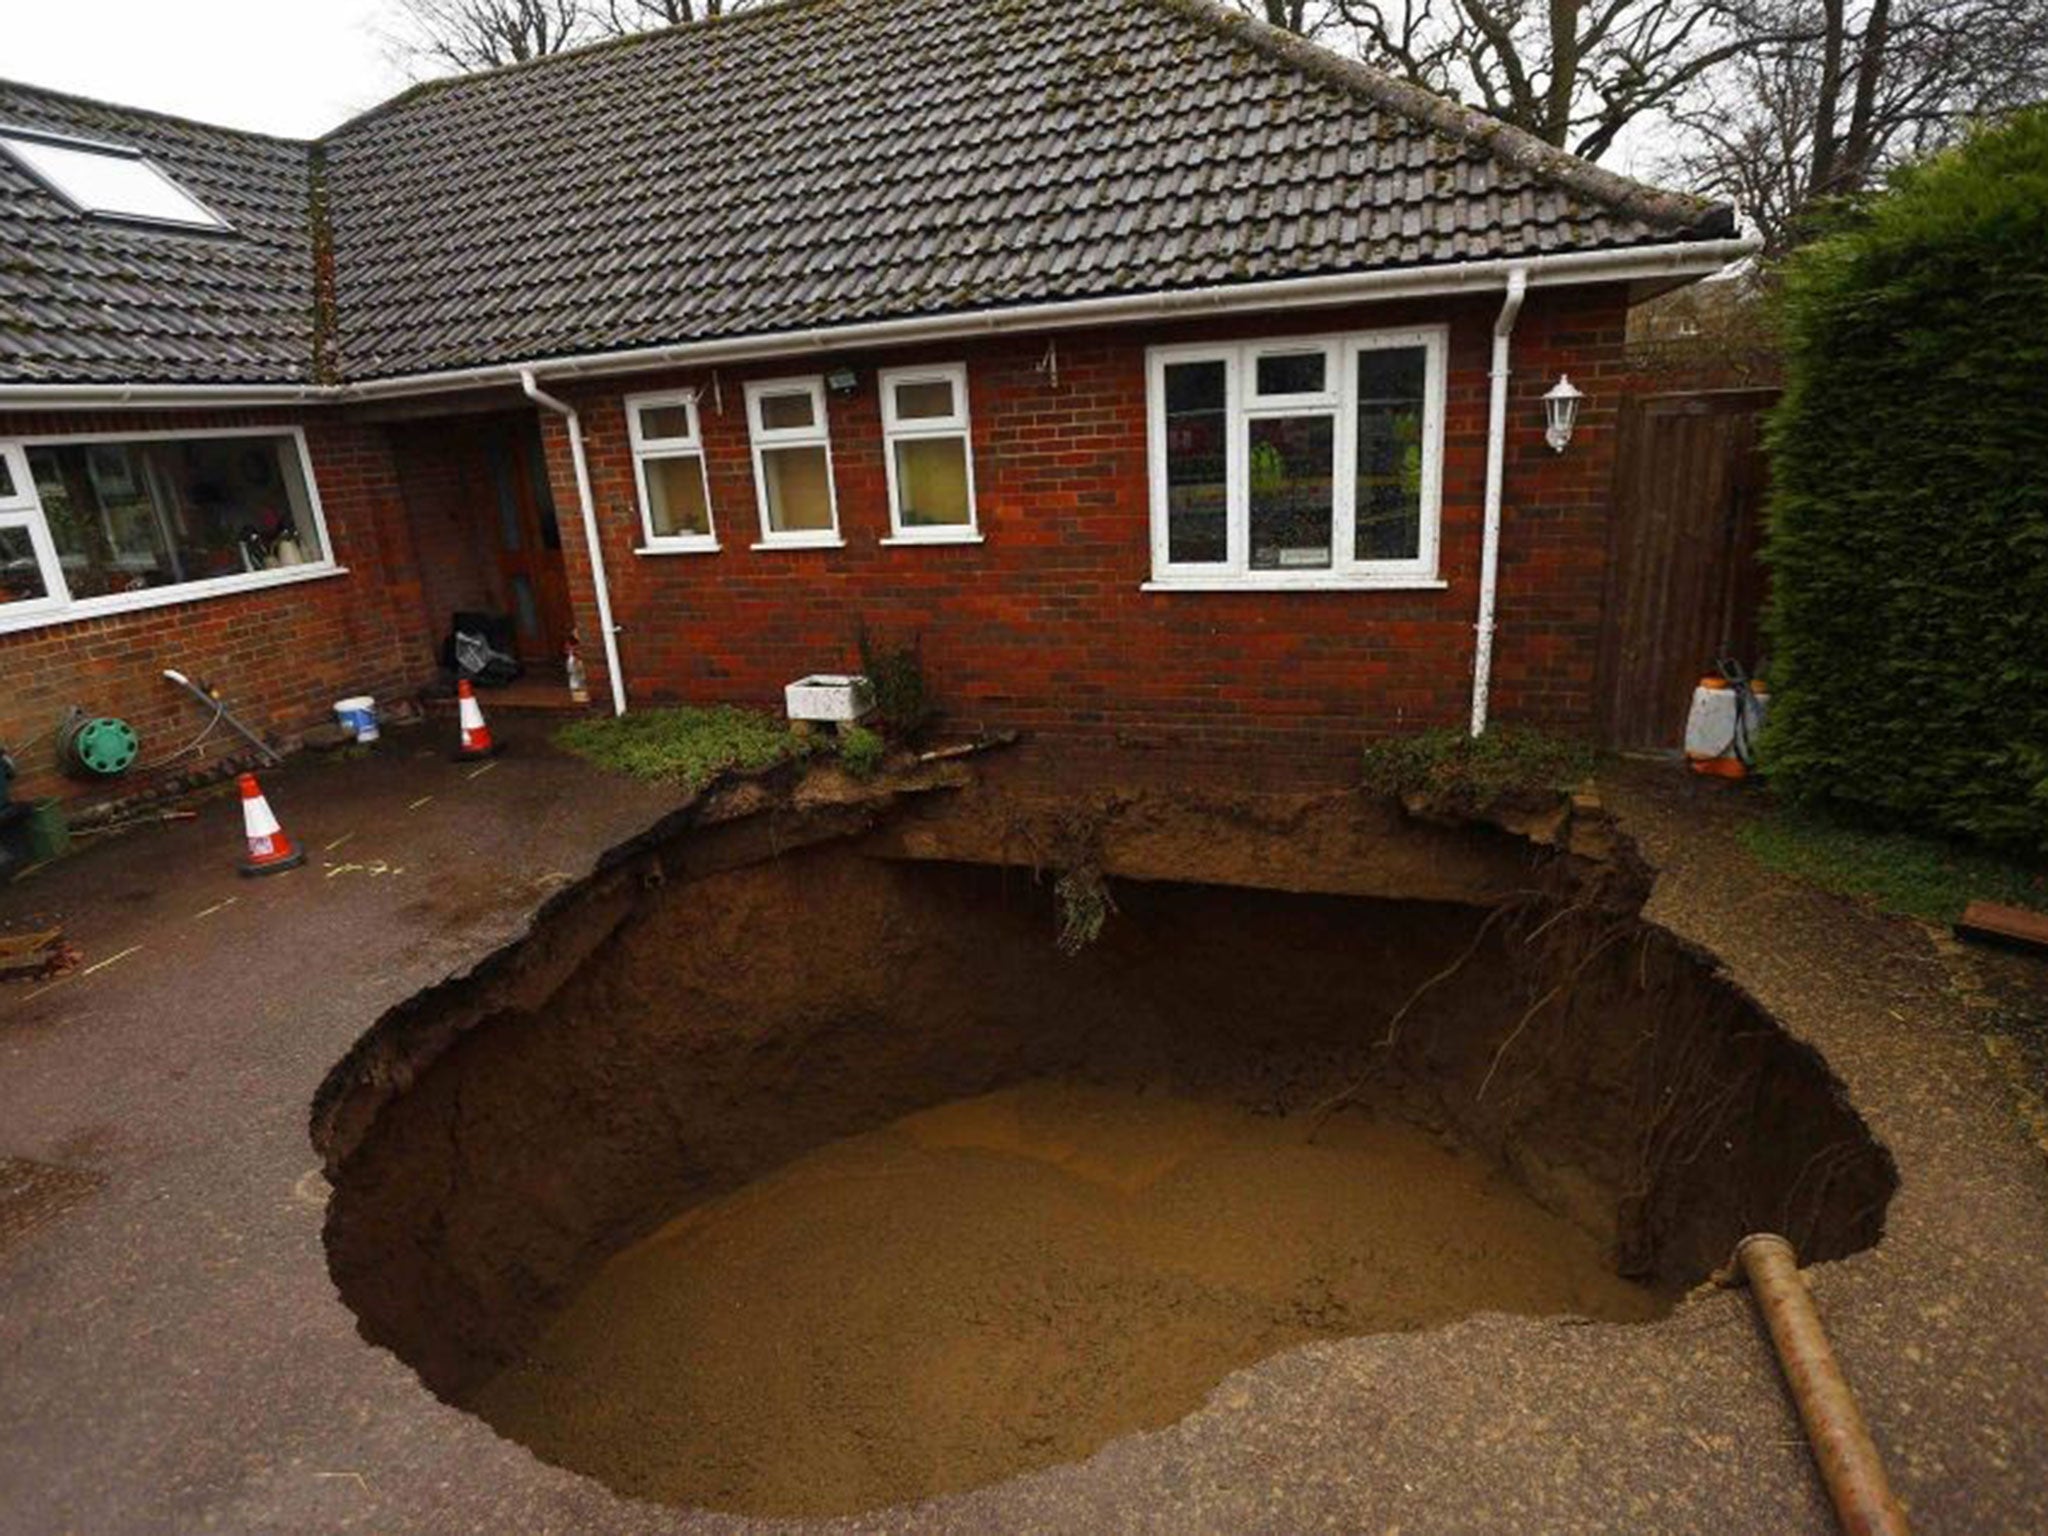 More Sinkholes Will Open Up Across Britain As The Effects Of